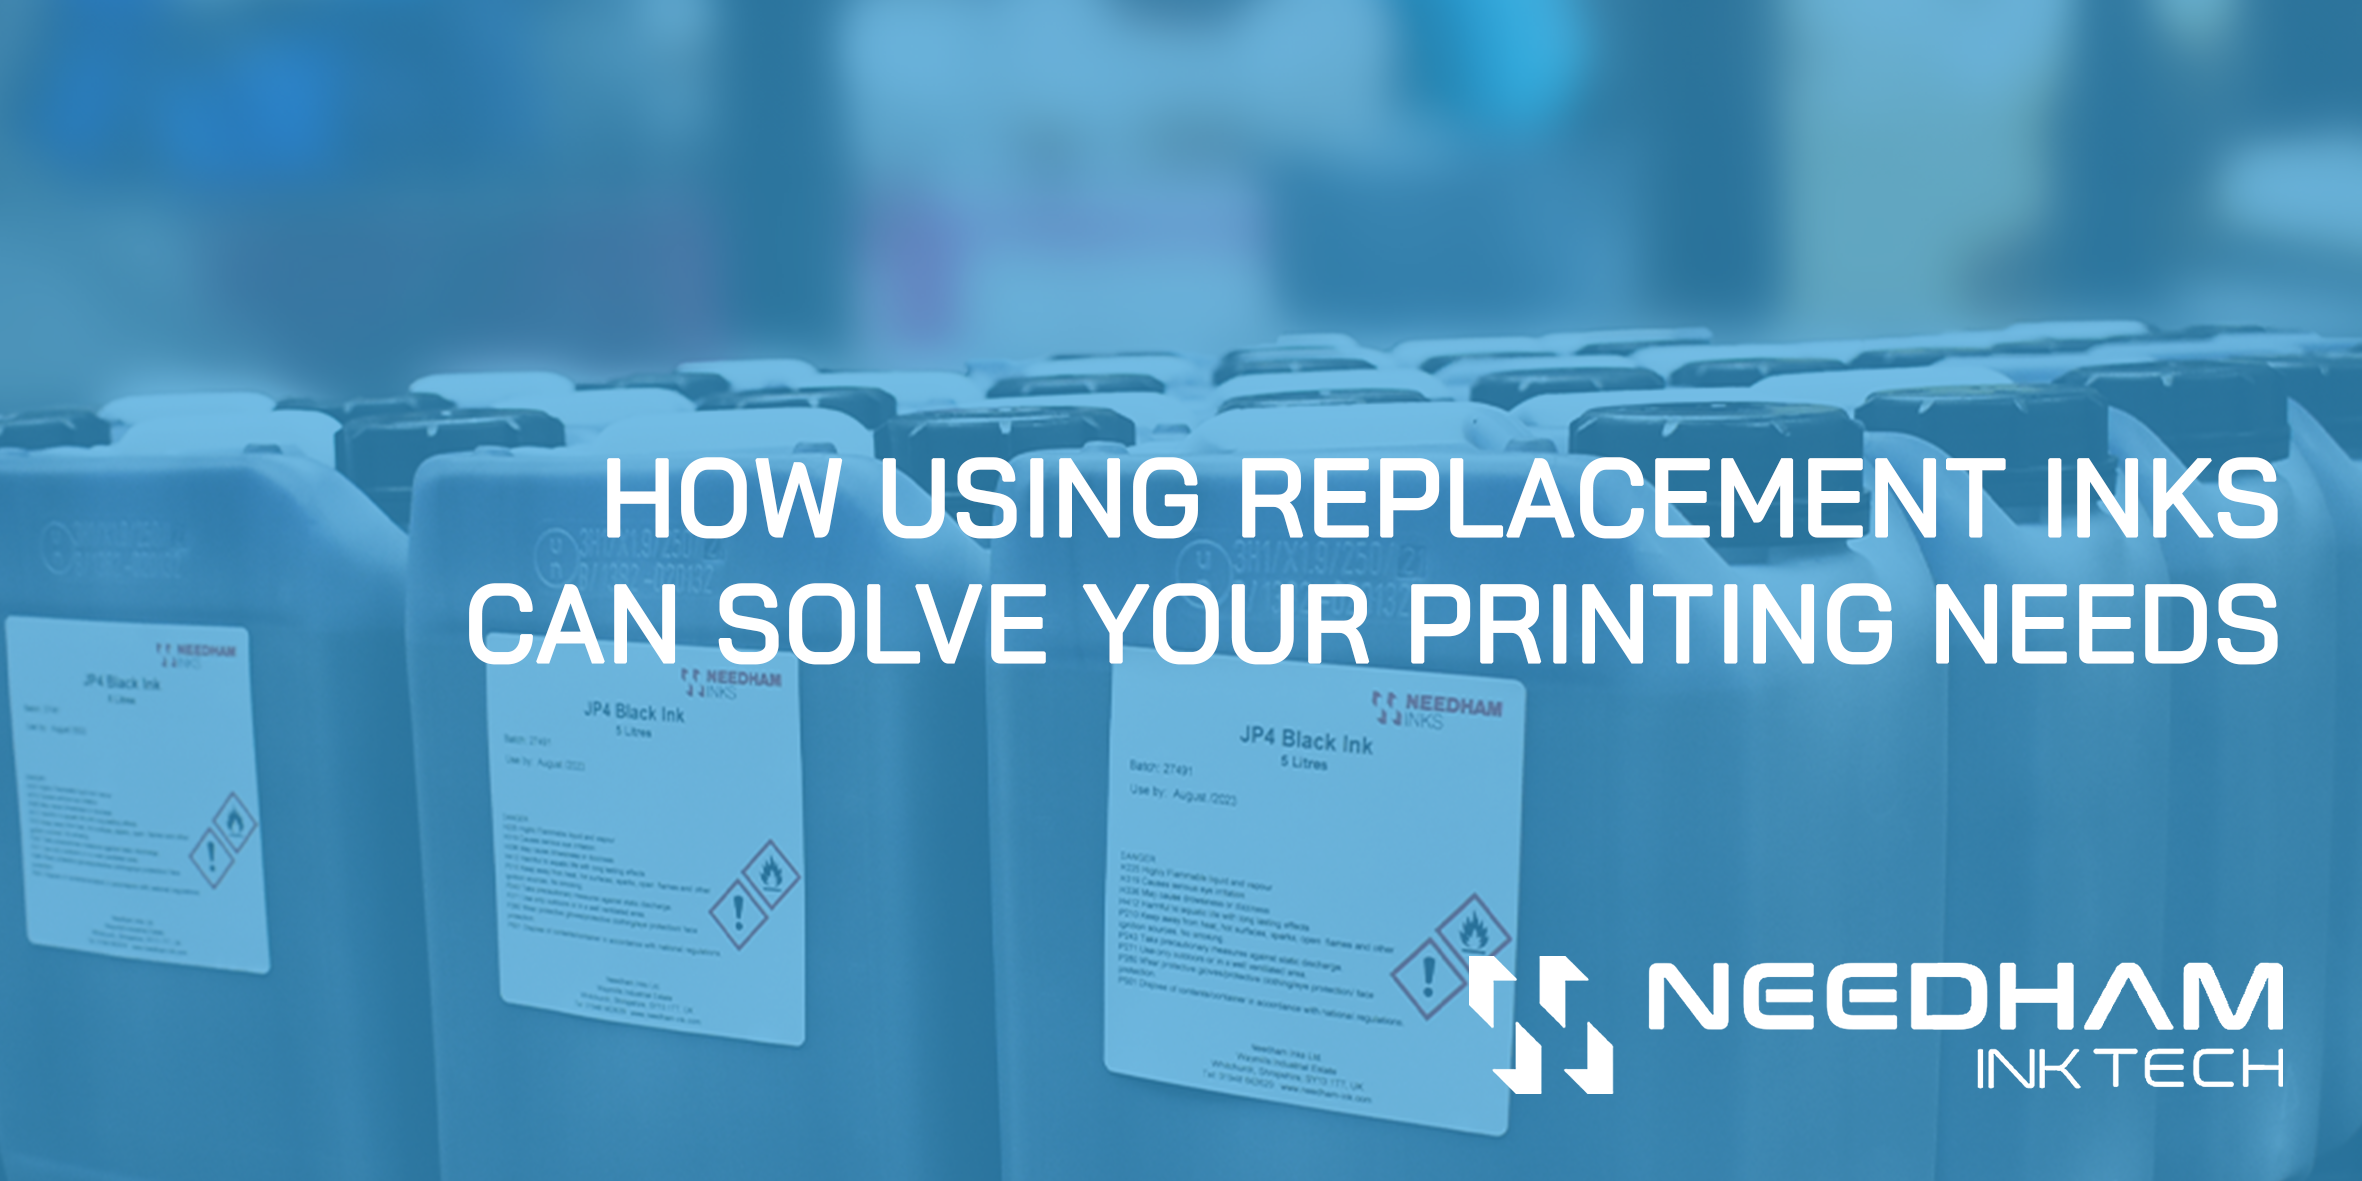 How using replacement inks can solve your printing needs